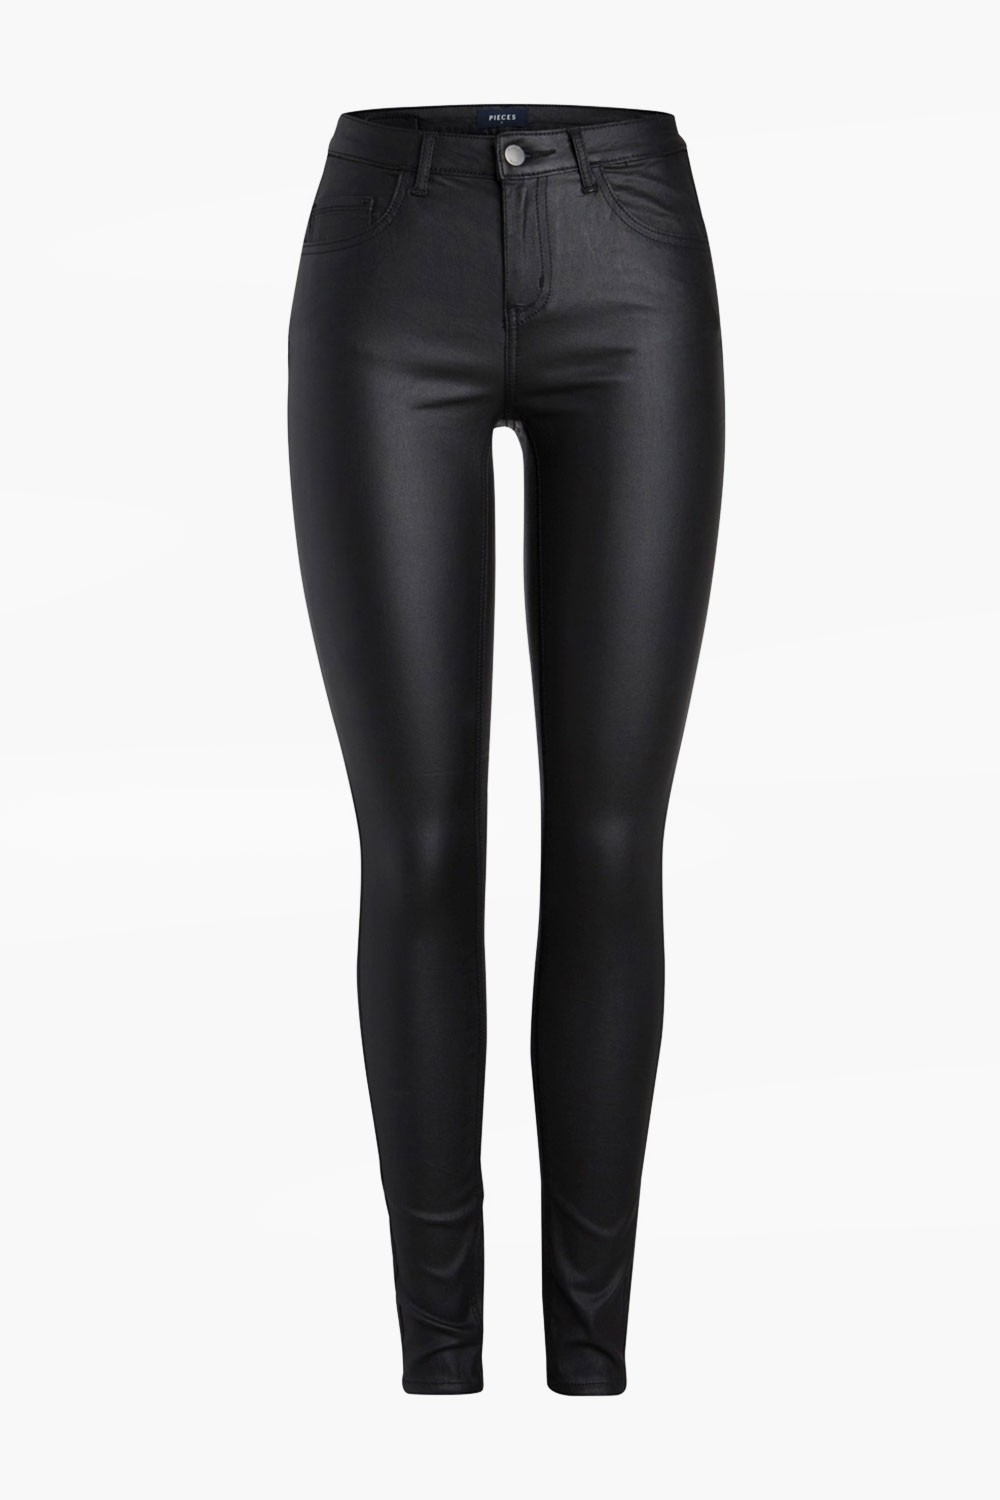 Pieces Five Mid Rise Coated Trousers in Black | iCLOTHING